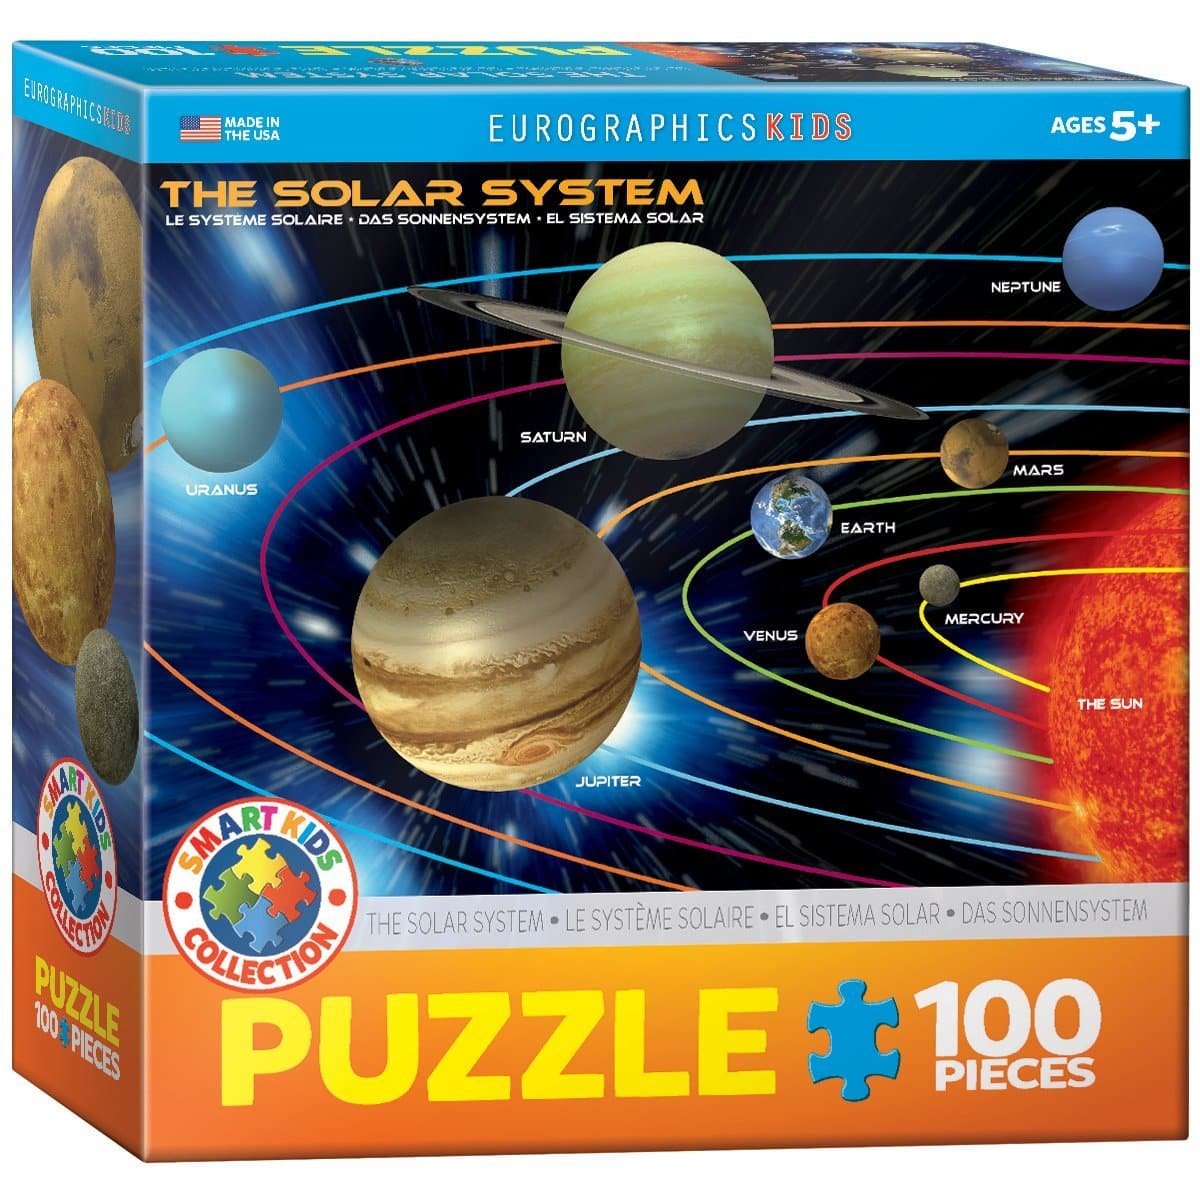 DEAL ALERT: The Solar System 100 Piece Jigsaw Puzzle – 36% off!